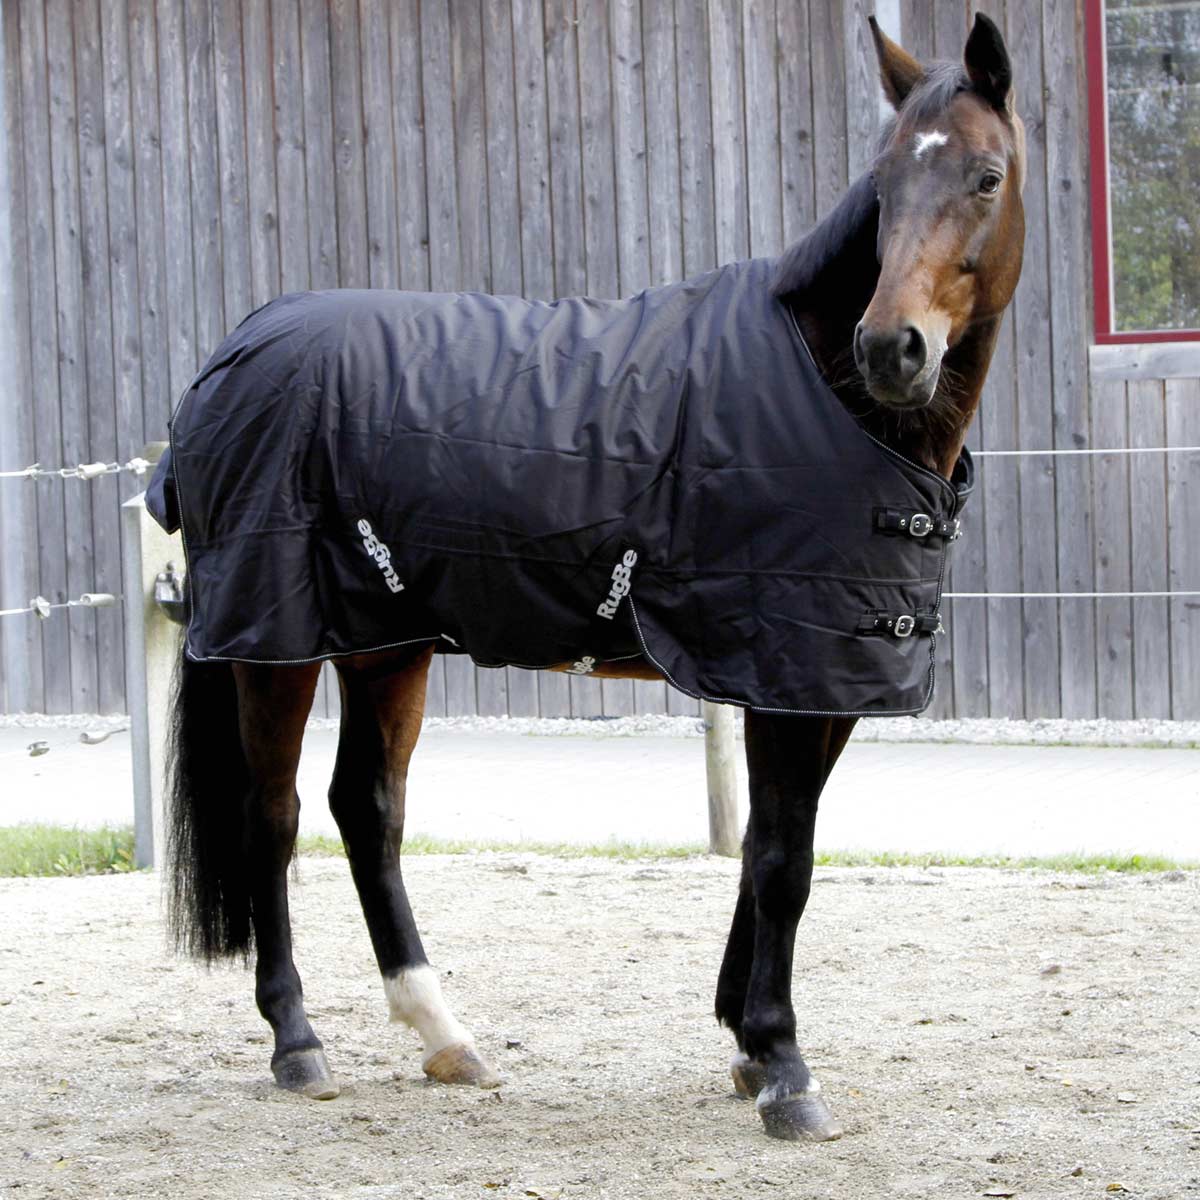 Covalliero RugBe Winter rug 600D, 200g 165